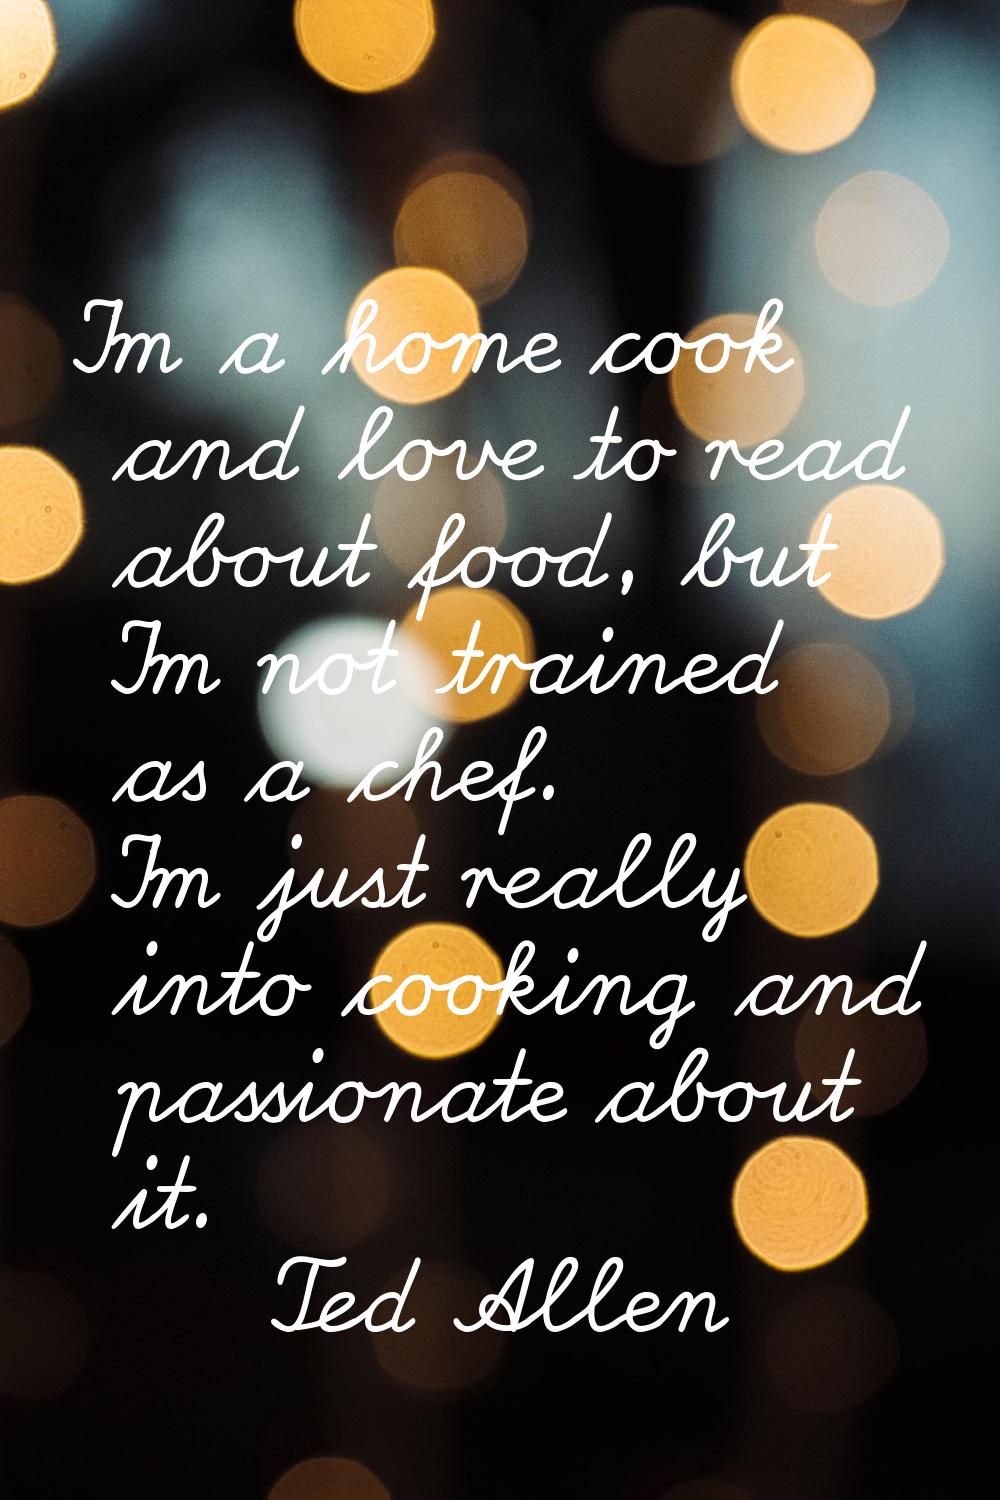 I'm a home cook and love to read about food, but I'm not trained as a chef. I'm just really into co